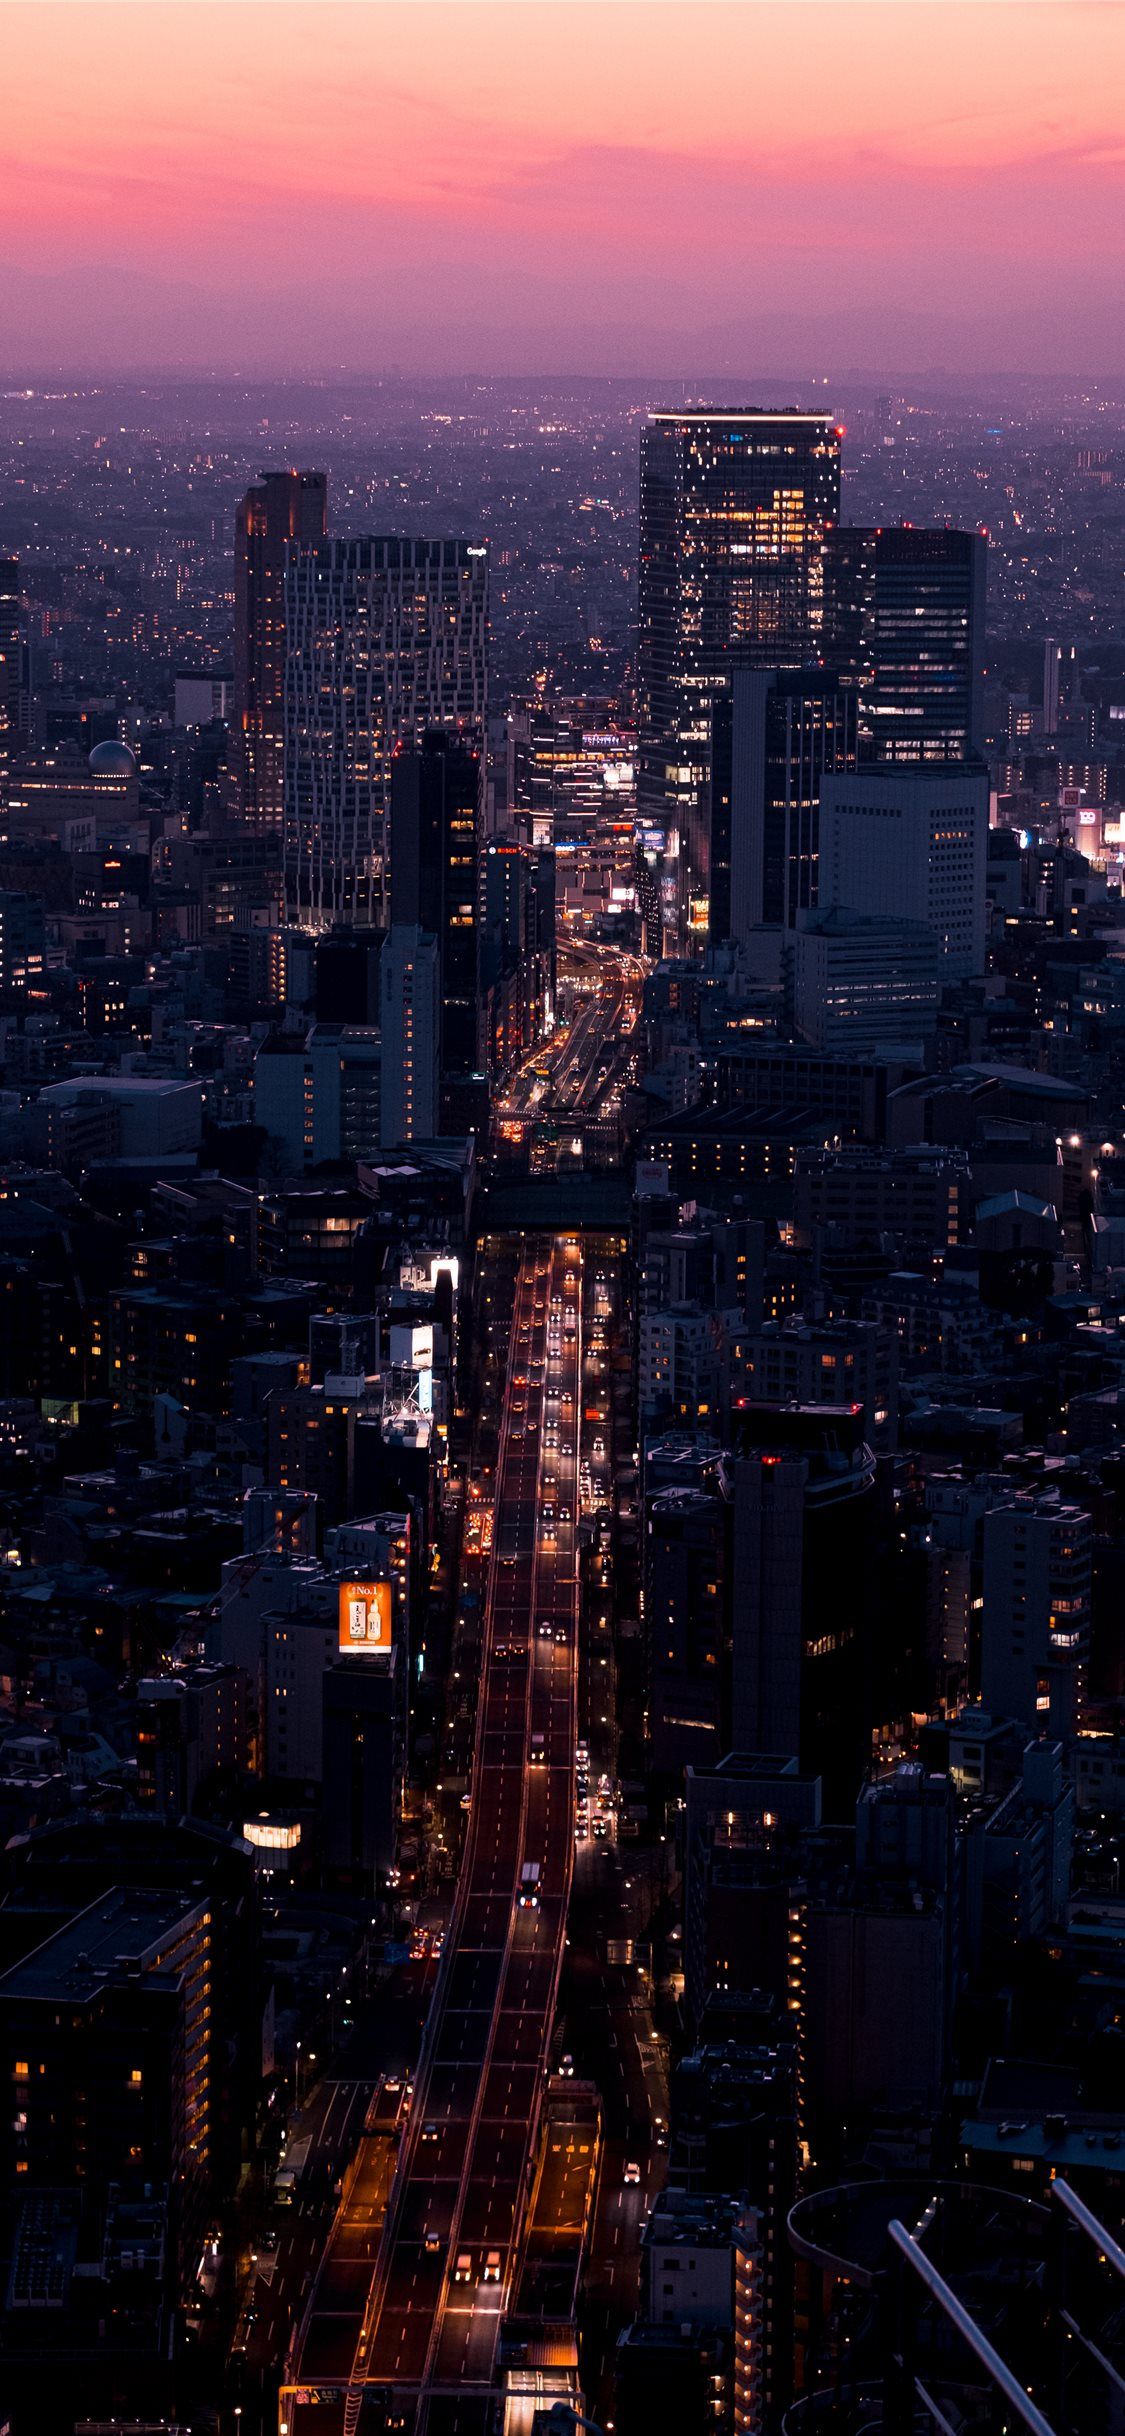 aerial view of city buildings during night time landscape nature